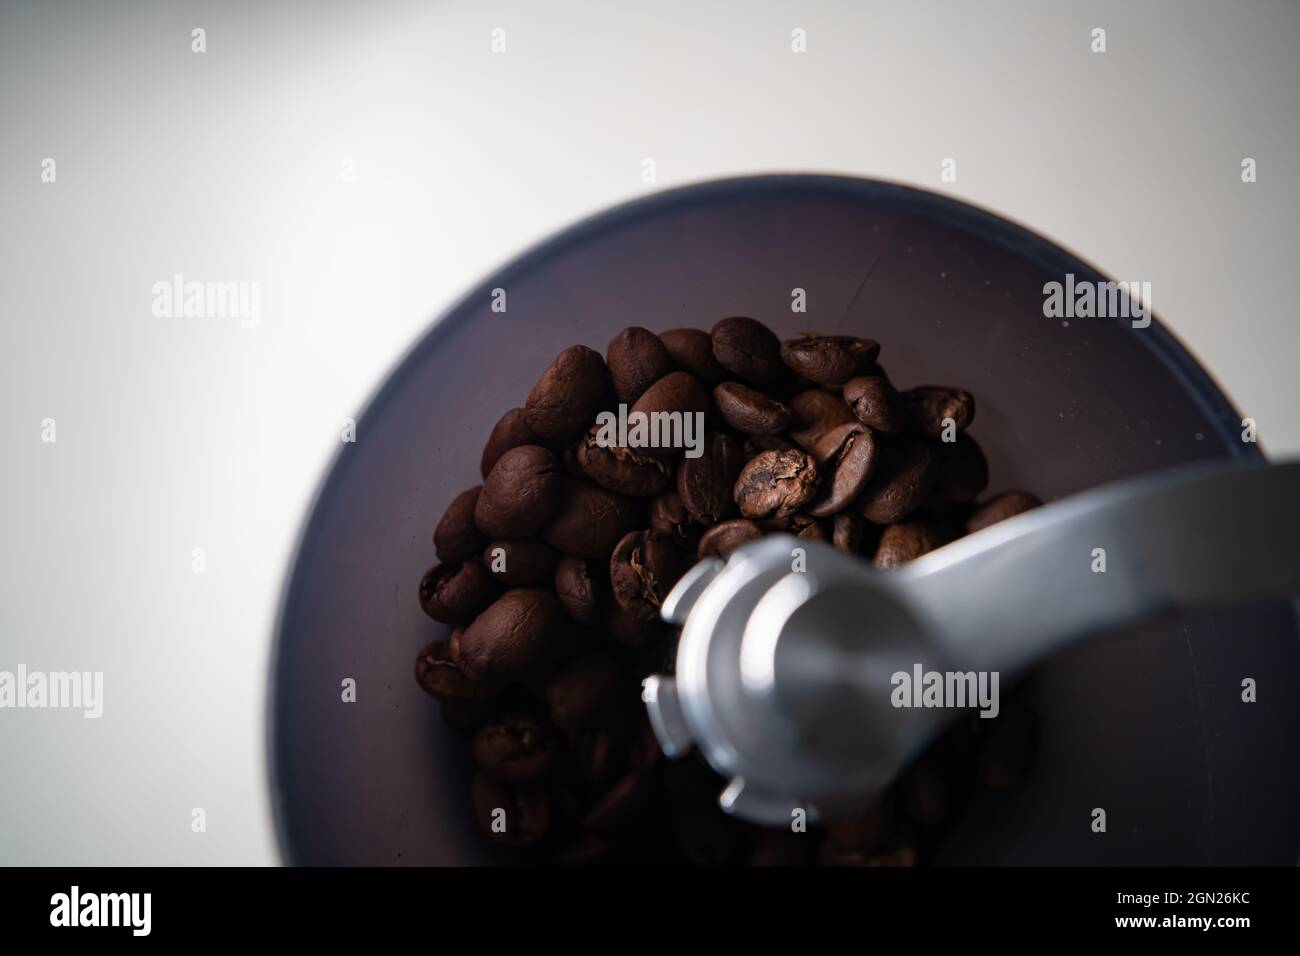 roasted coffee beans in a coffee grinder Stock Photo